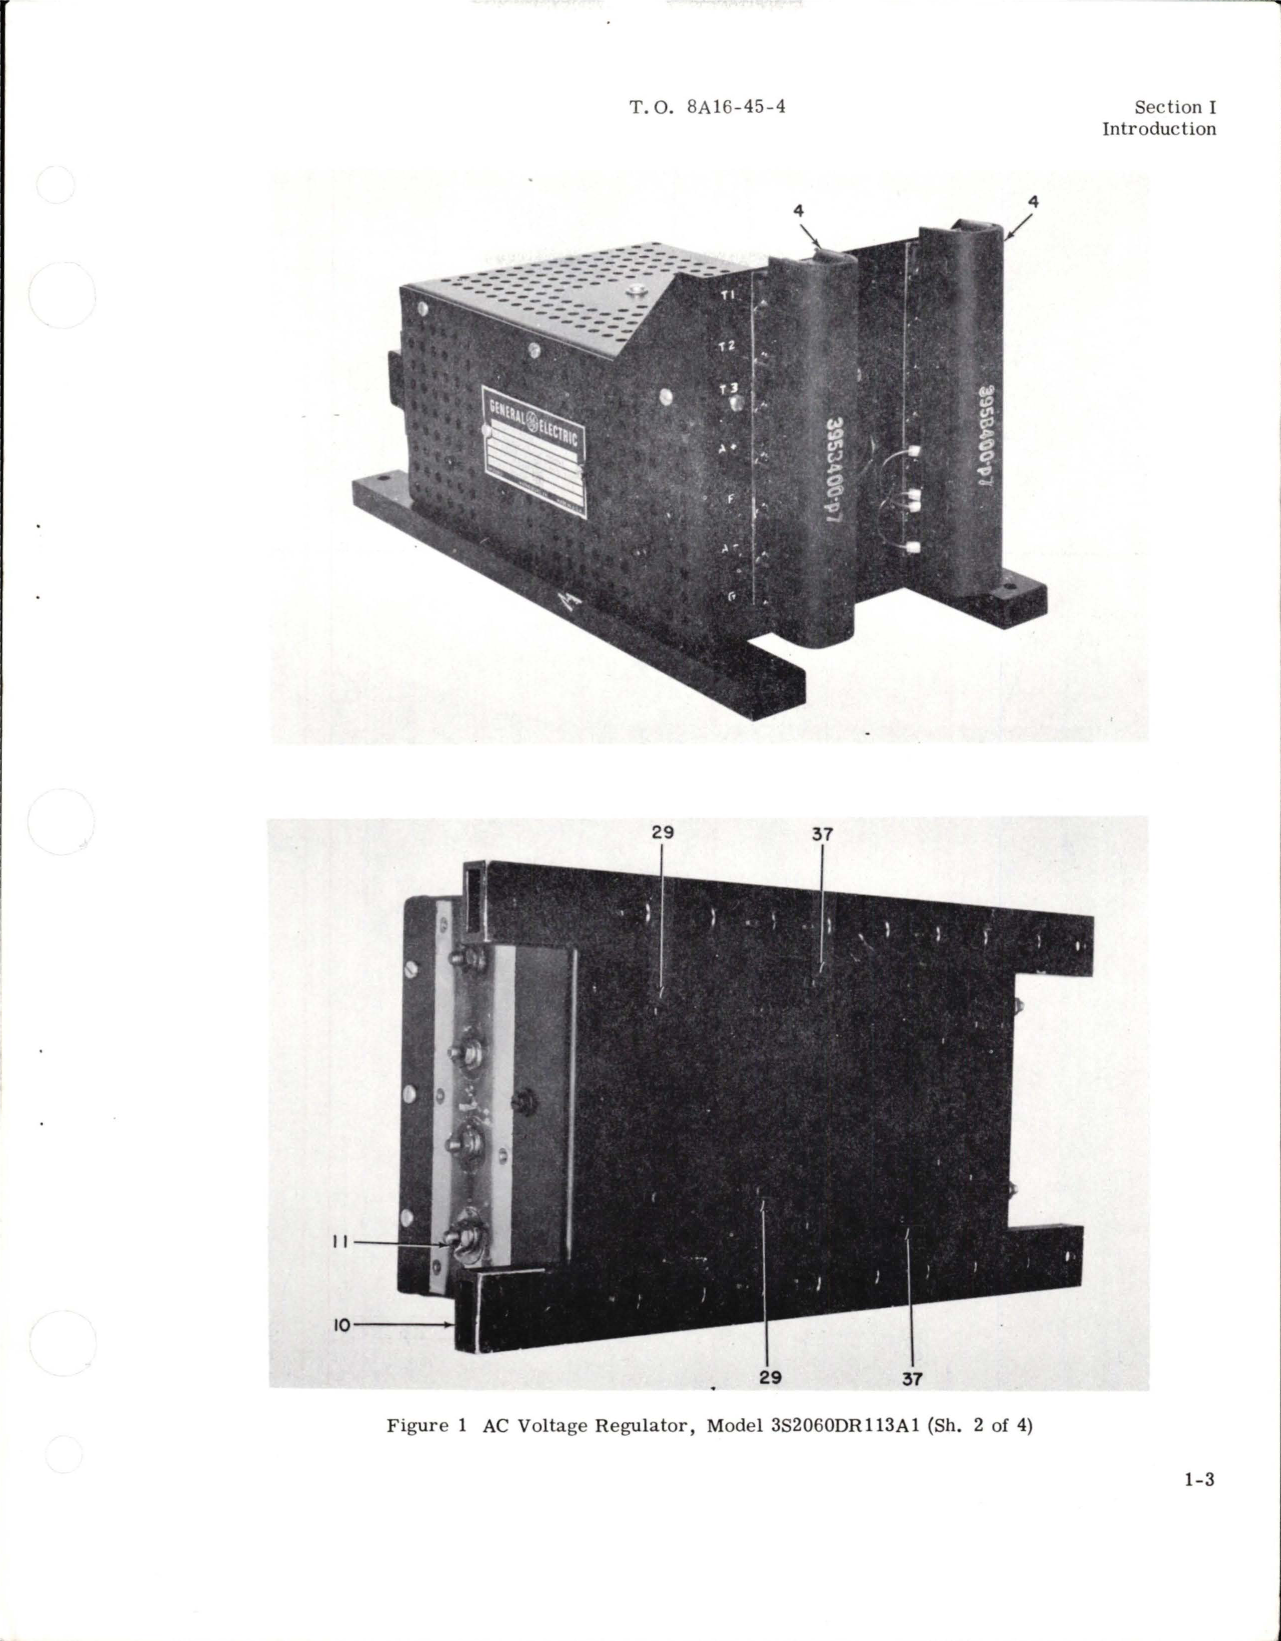 Sample page 5 from AirCorps Library document: Illustrated Parts Breakdown for AC Voltage Regulator - Model 3S2060DR113A1